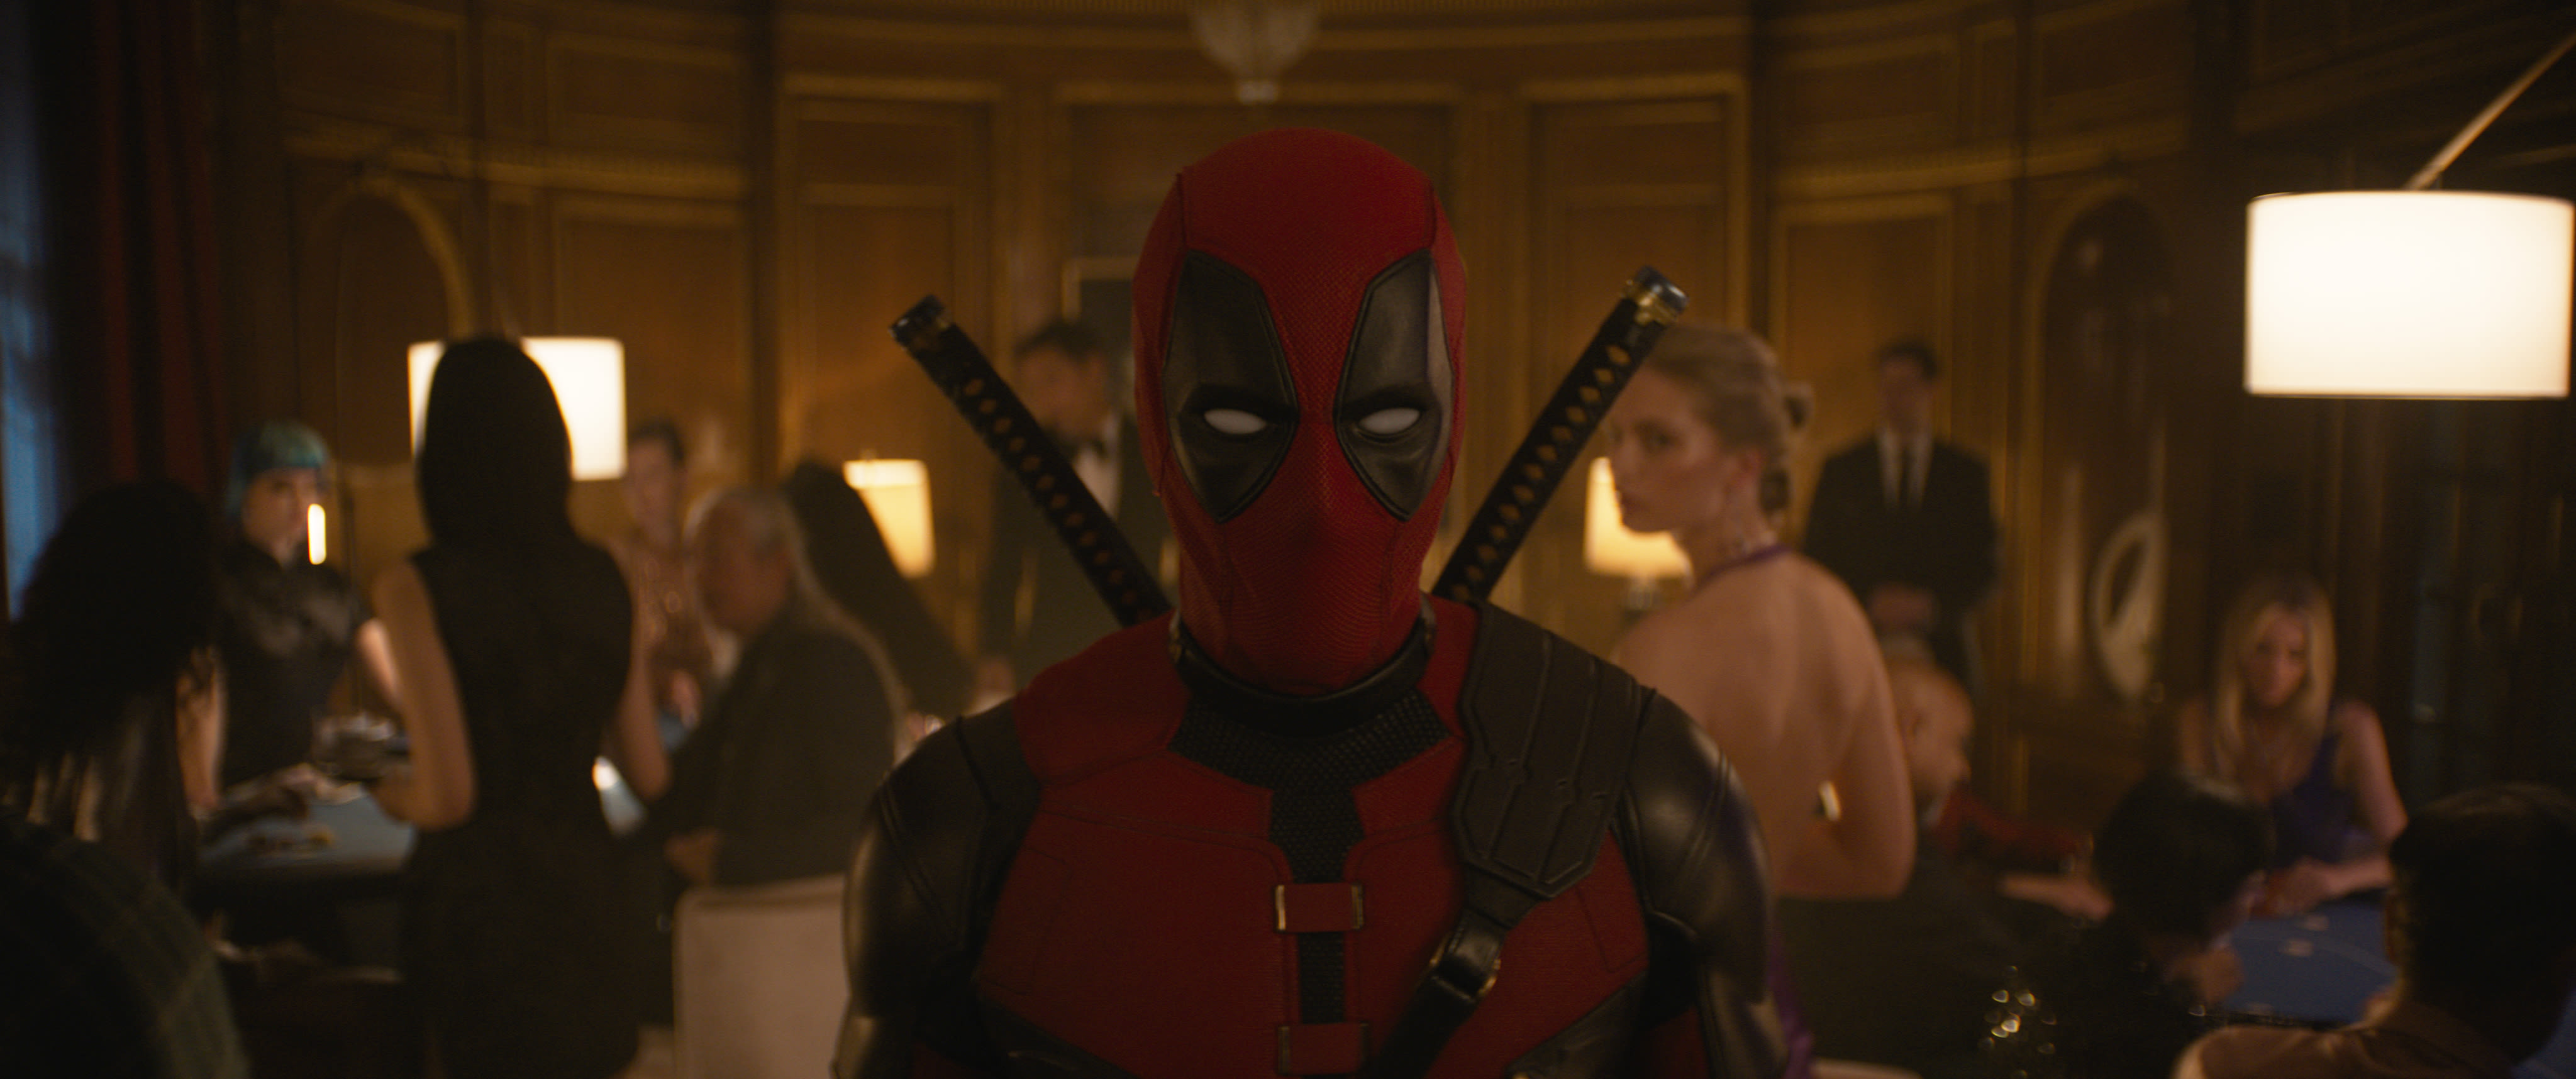 ‘Deadpool & Wolverine’ Slashes R-Rated Wednesday U.S. Box Office Record; Global Crossing $600M+ Today